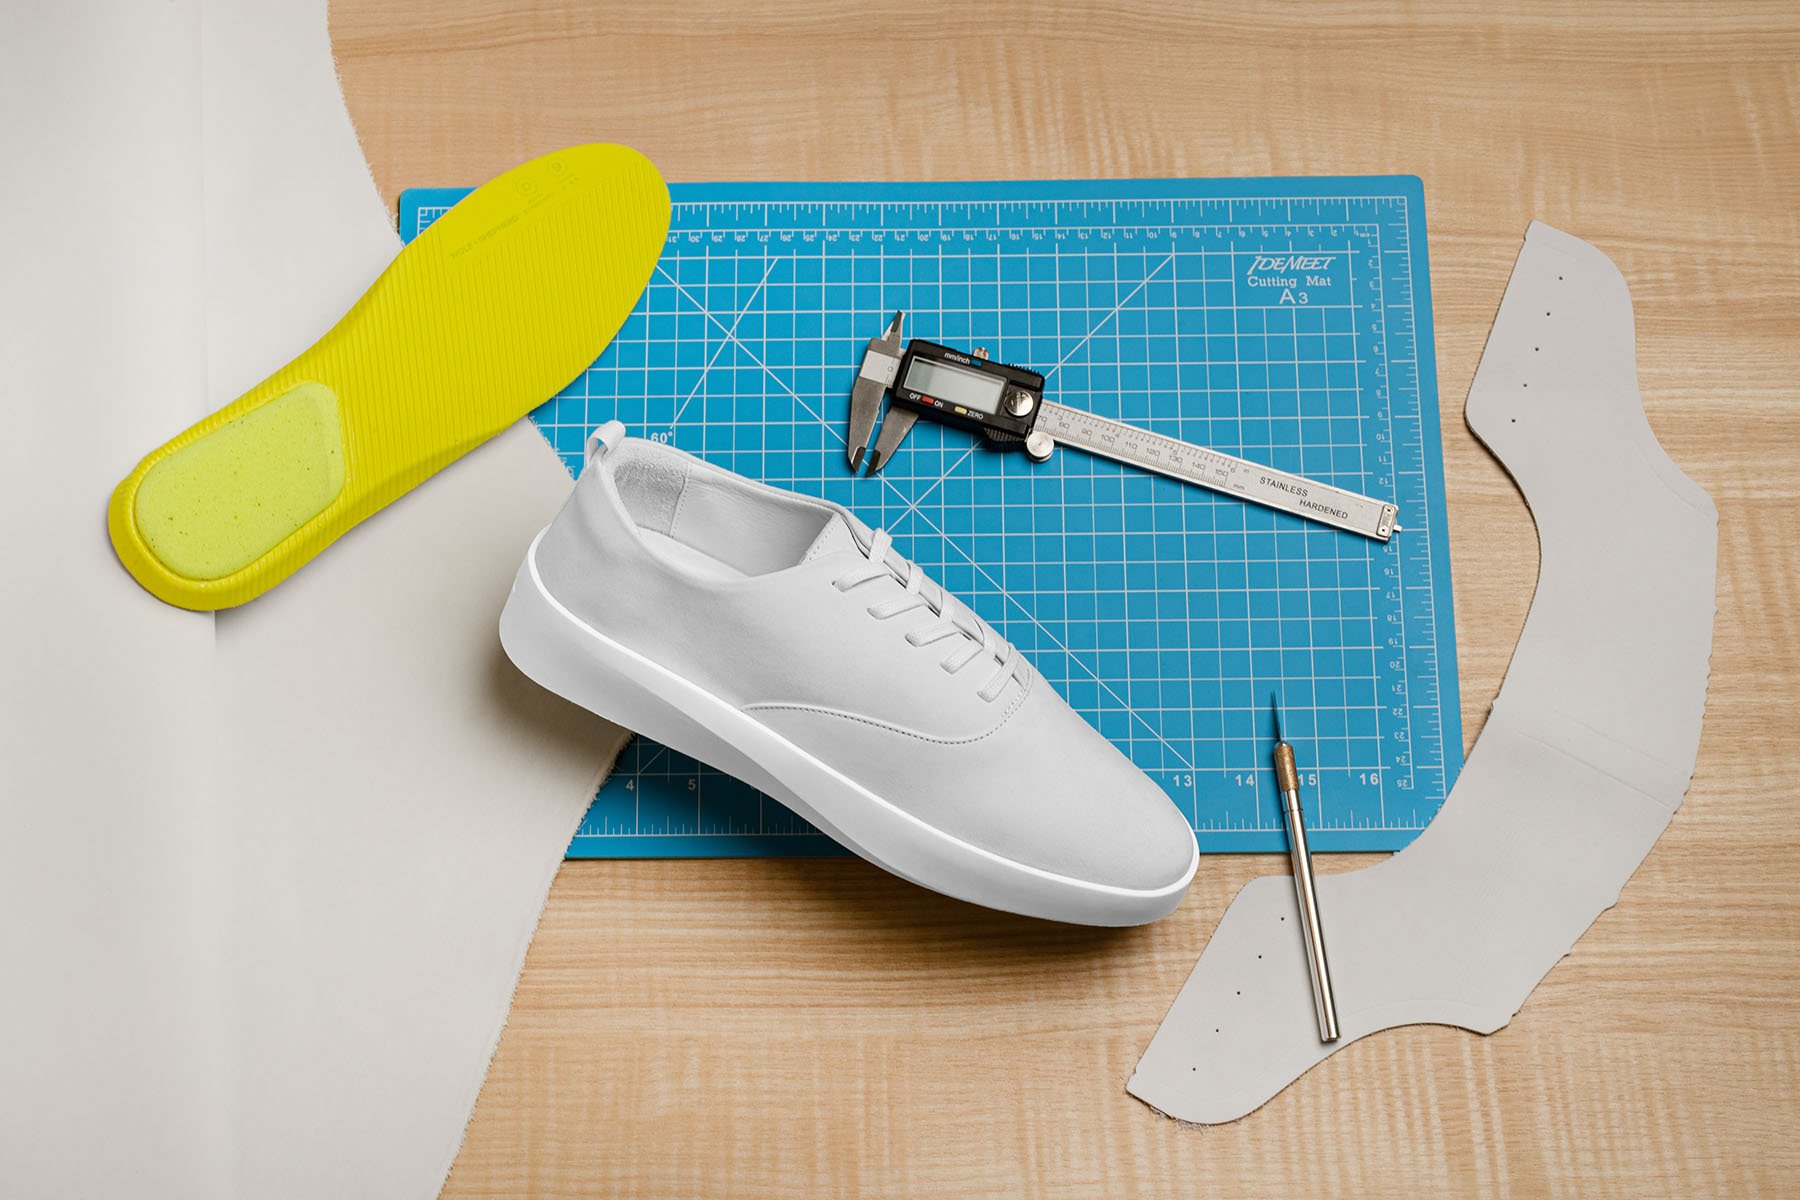 Overhead view of Cruise Lace up in white, Footbed, and measuring stick.